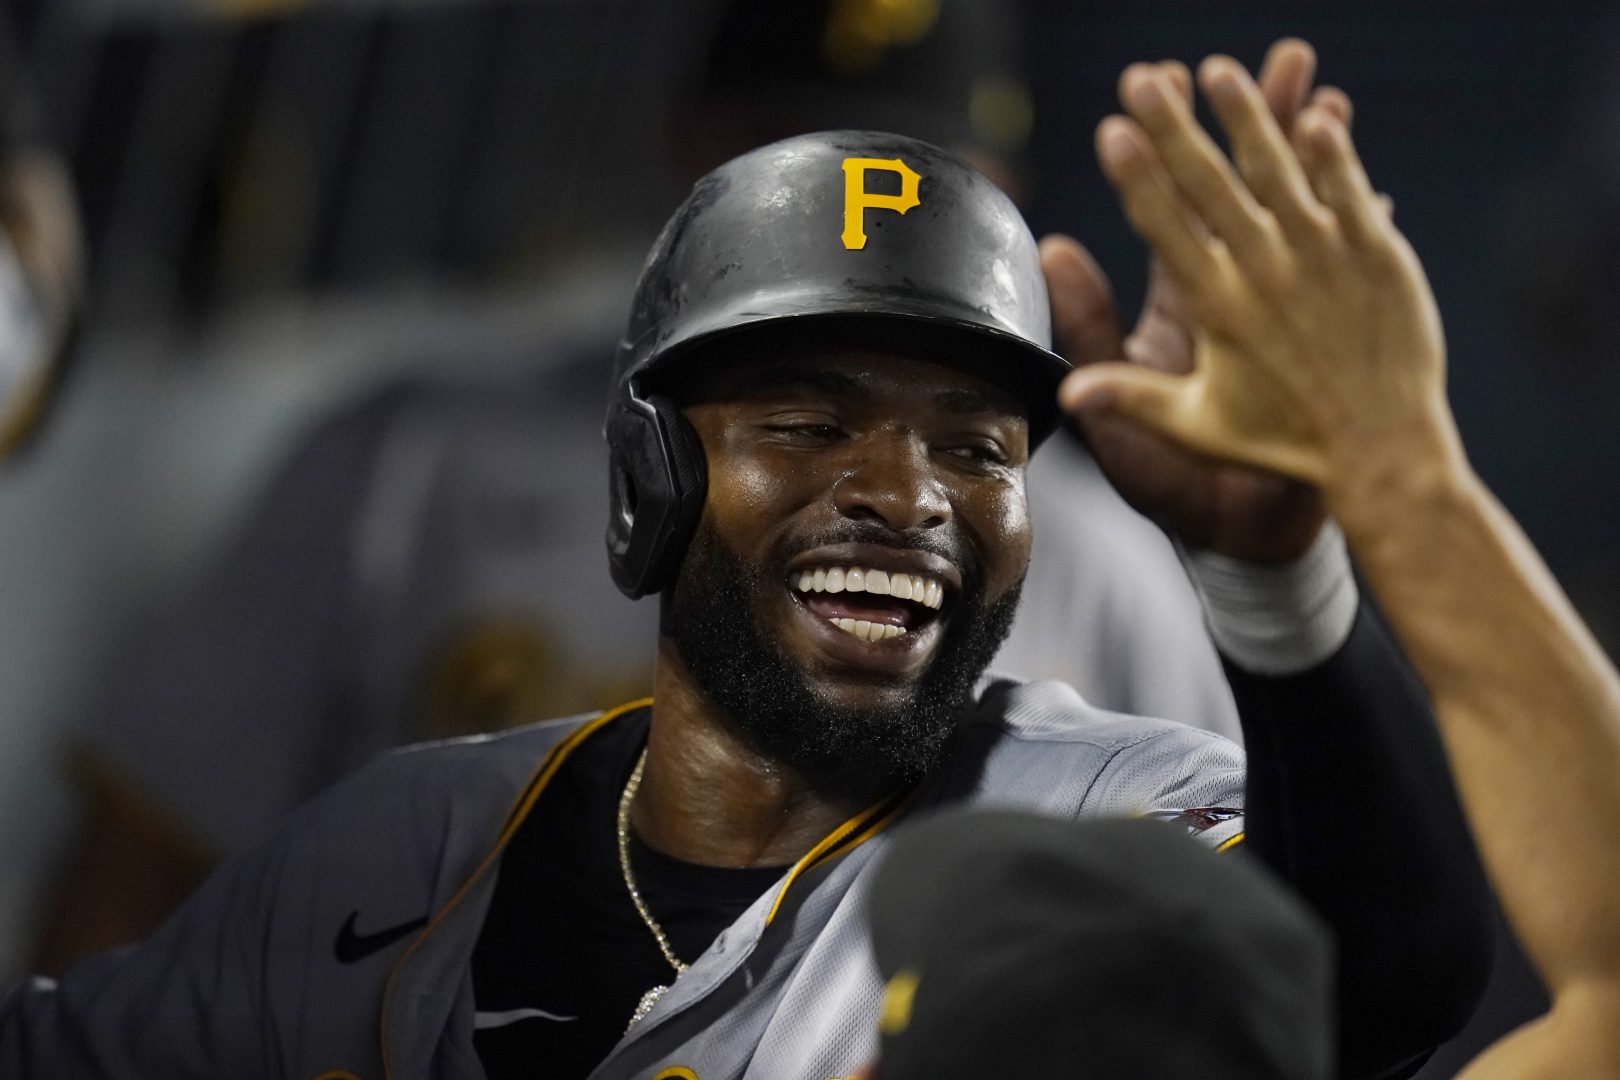 Pittsburgh Pirates' Gregory Polanco (25) is high-fived by teammates in the dugout after scoring a run during the sixth inning of a baseball game against the Los Angeles Dodgers Monday, Aug. 16, 2021, in Los Angeles. (AP Photo/Marcio Jose Sanchez)